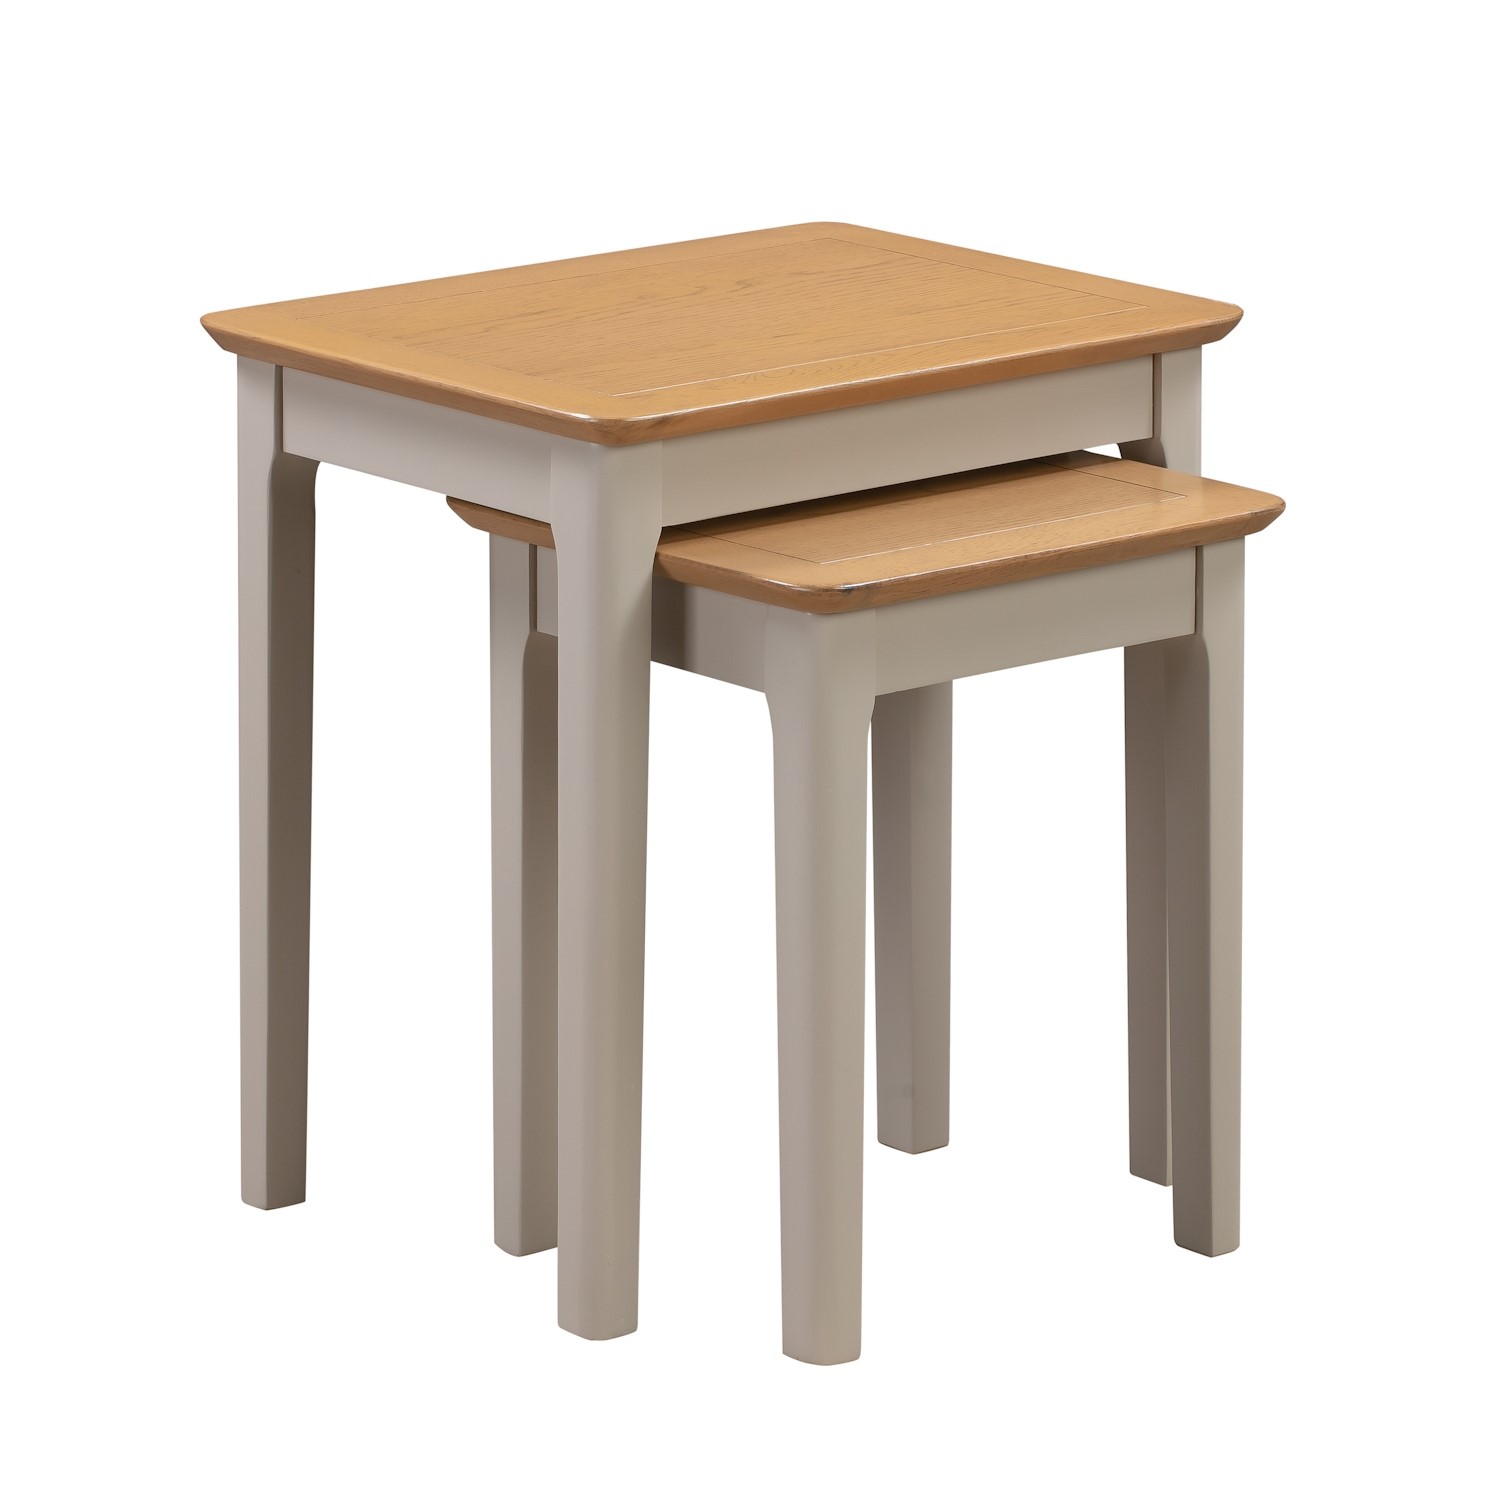 Photo of Grey and oak nest of side tables - adeline